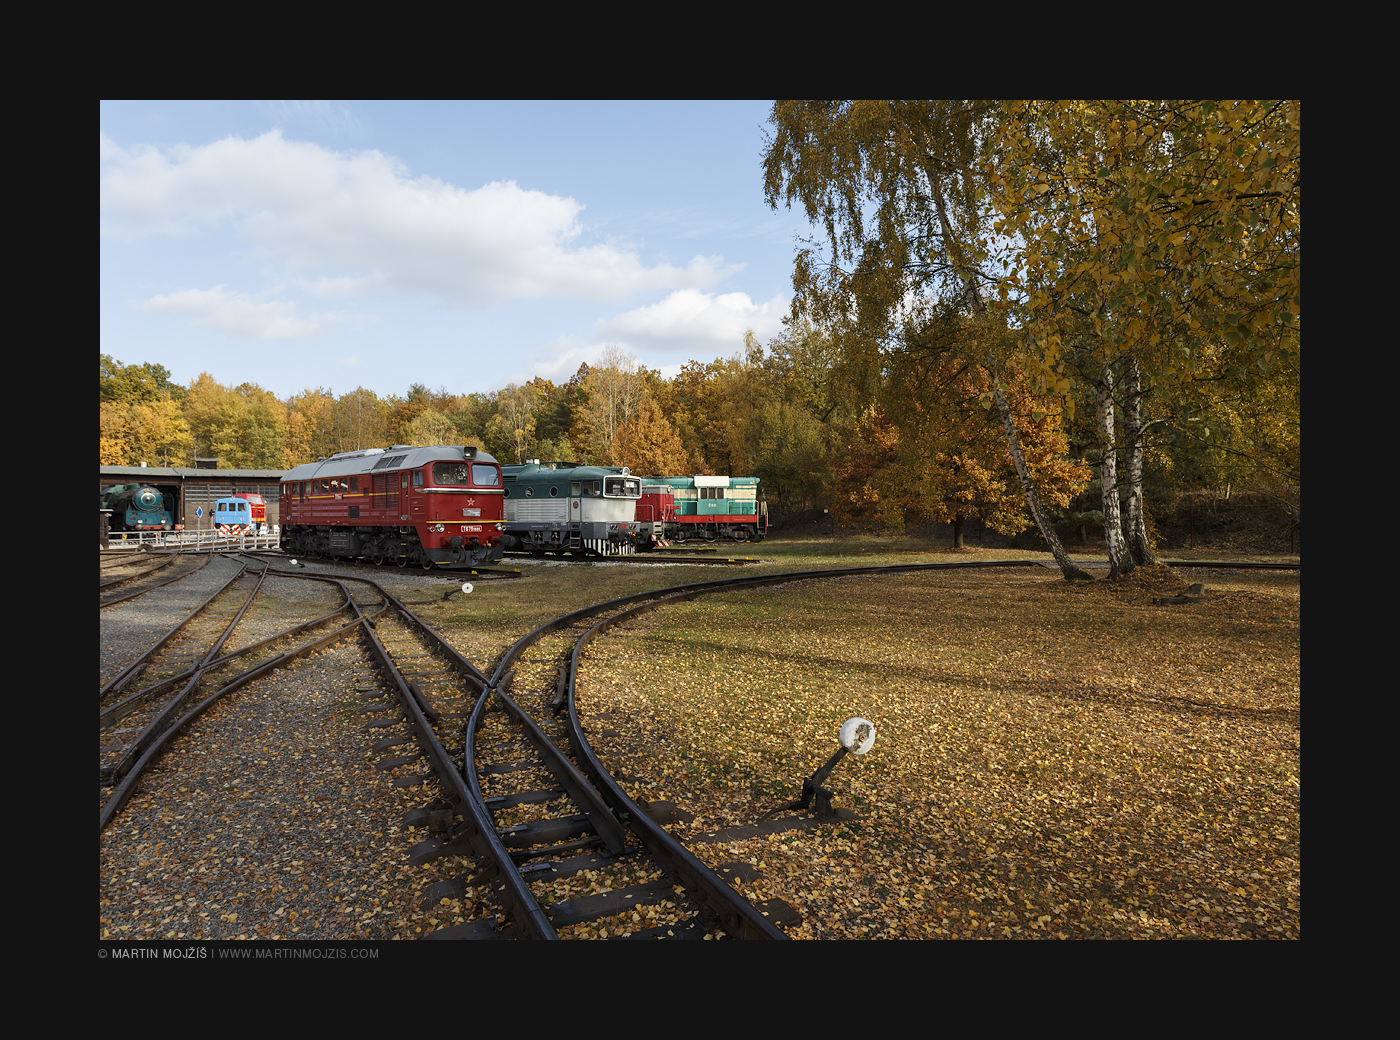 Birches, golden leaves and narrow gauge railway tracks.